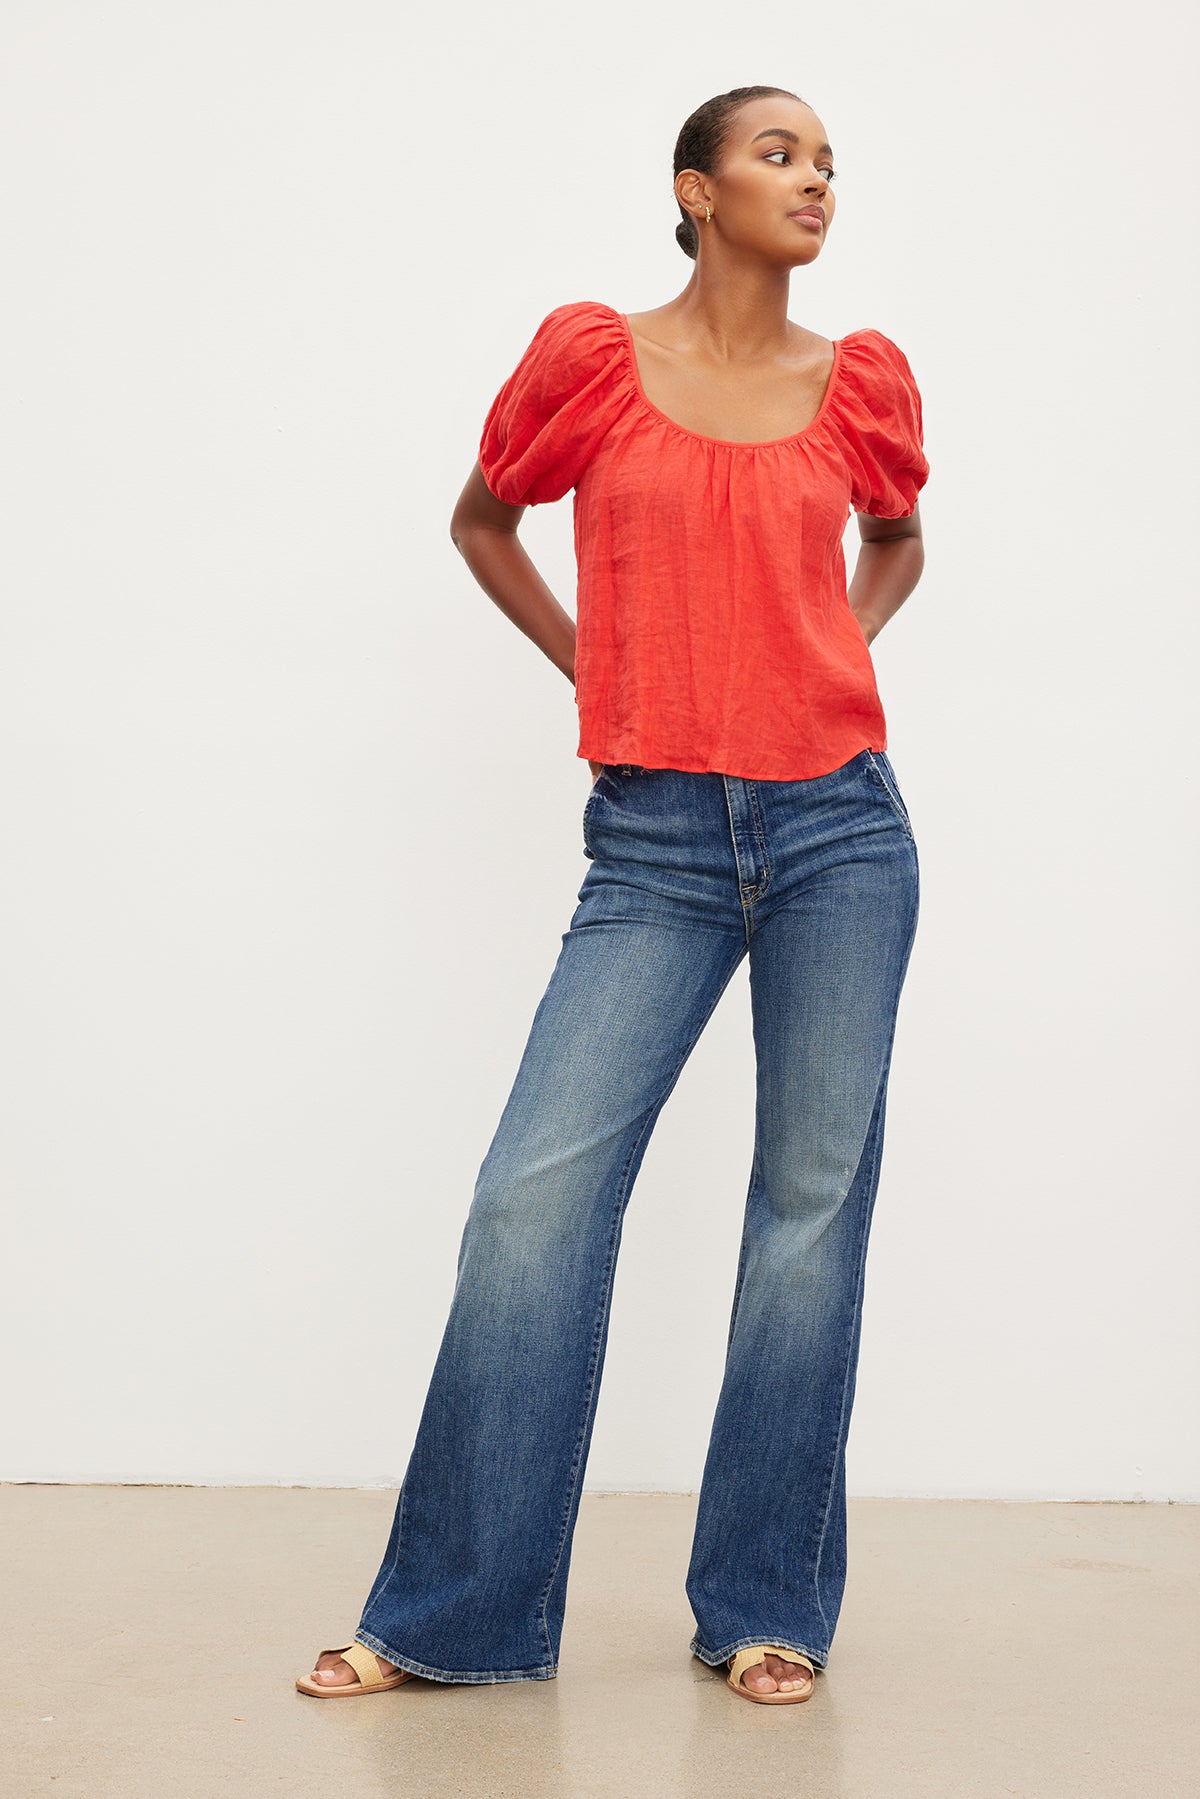   A woman wearing a Velvet by Graham & Spencer Dana Linen Scoop Neck Top and flared jeans. 